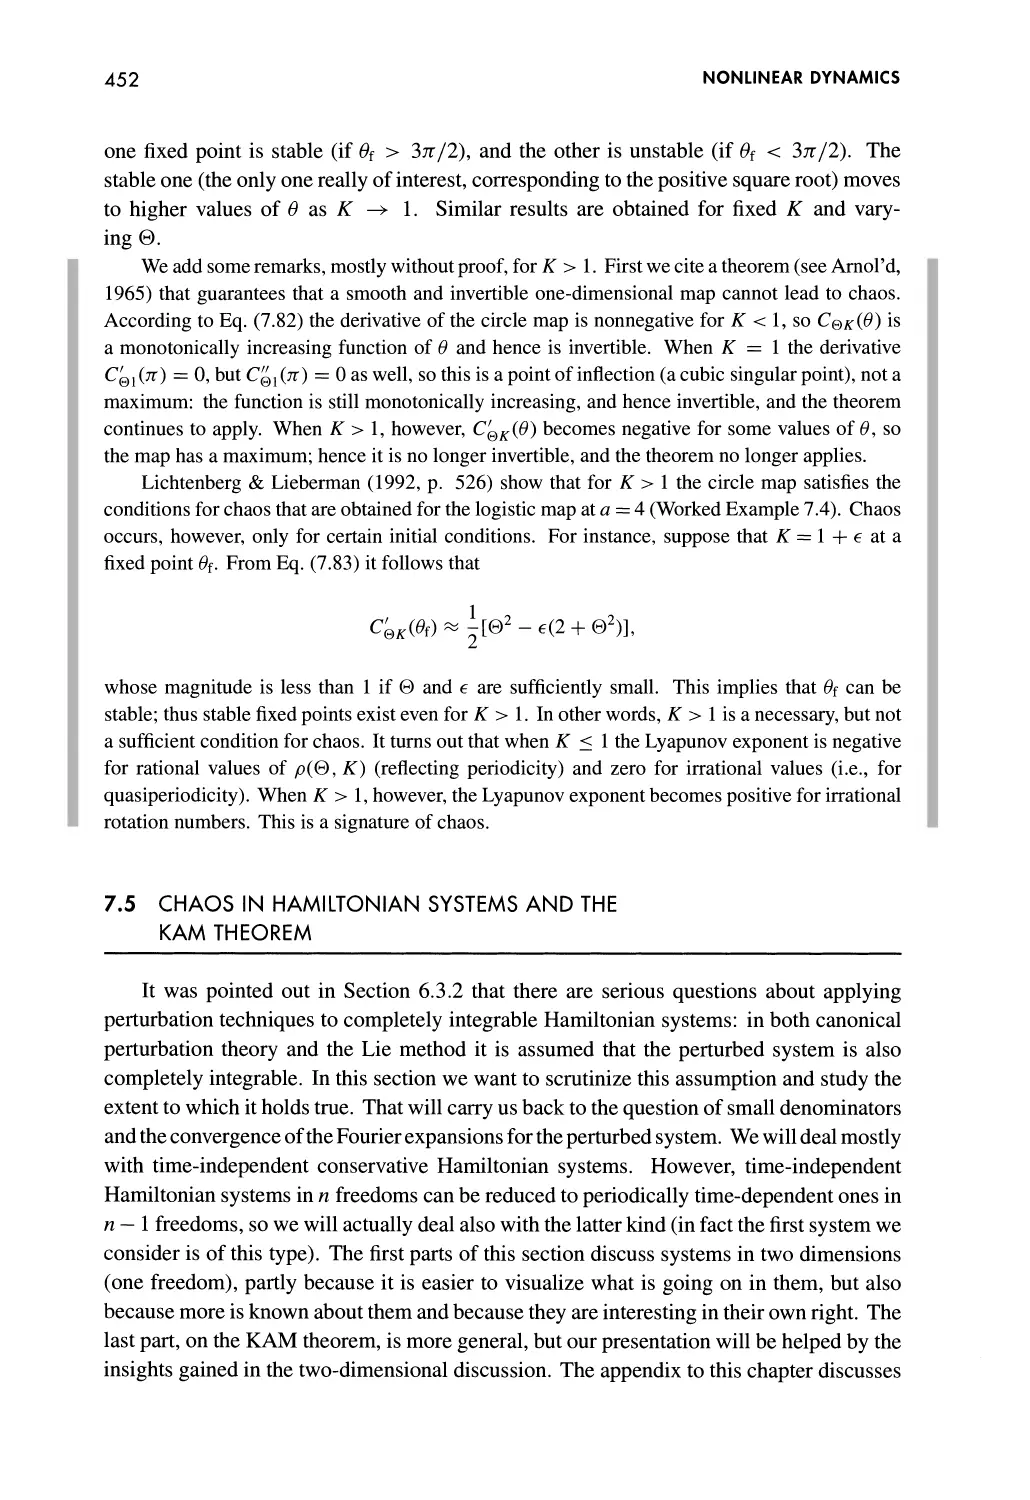 7.5 Chaos in Hamiltonian Systems and the KAM Theorem